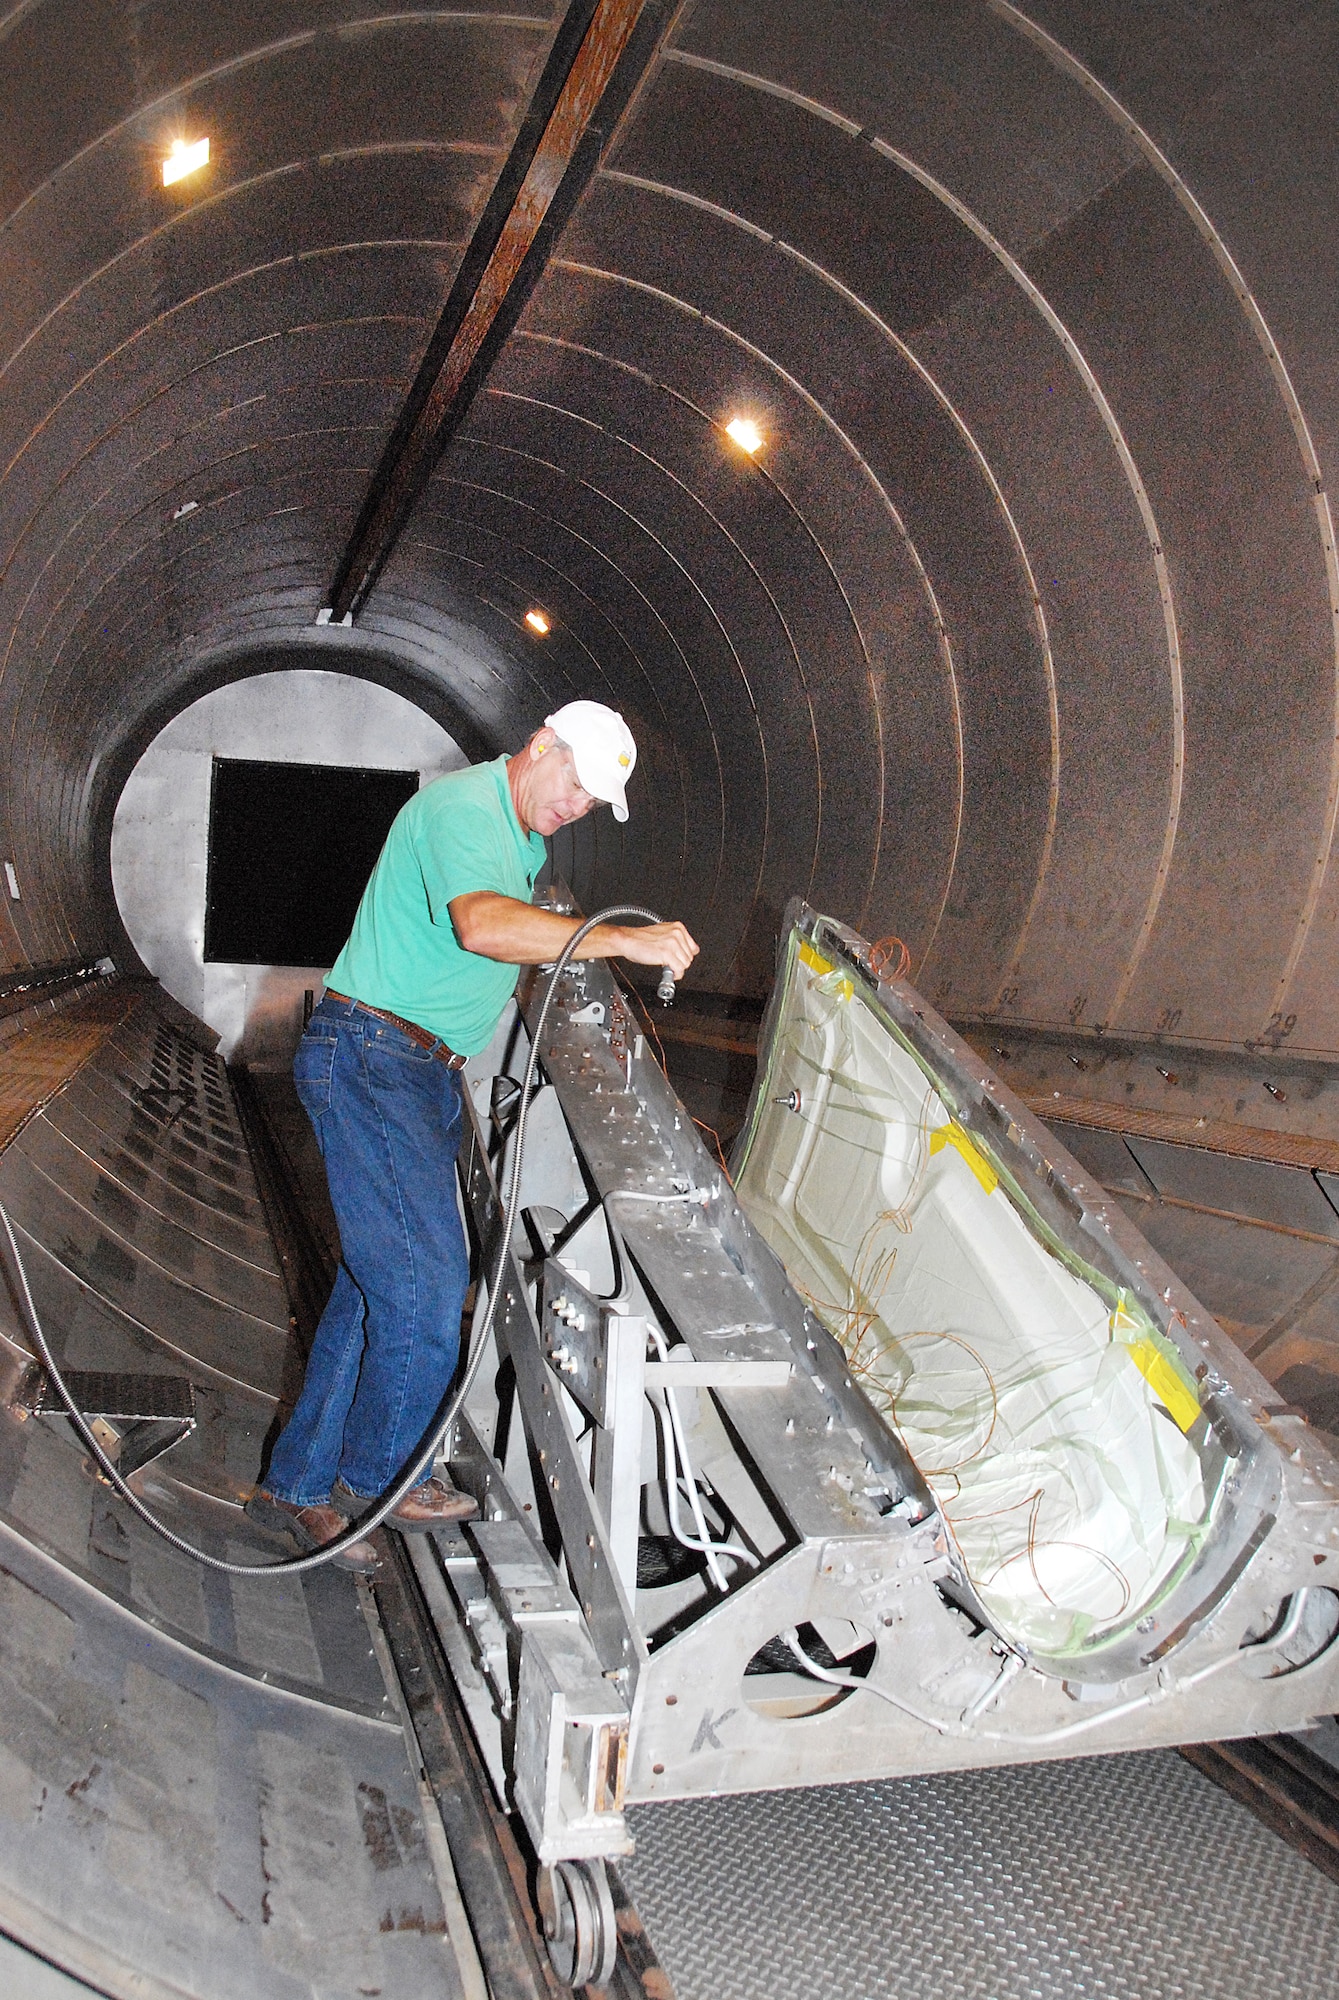 Michael Vaugh positions the nose for a C-5 pylon in the large autoclave in Bldg. 169. (U. S. Air Force photo by Sue Sapp)